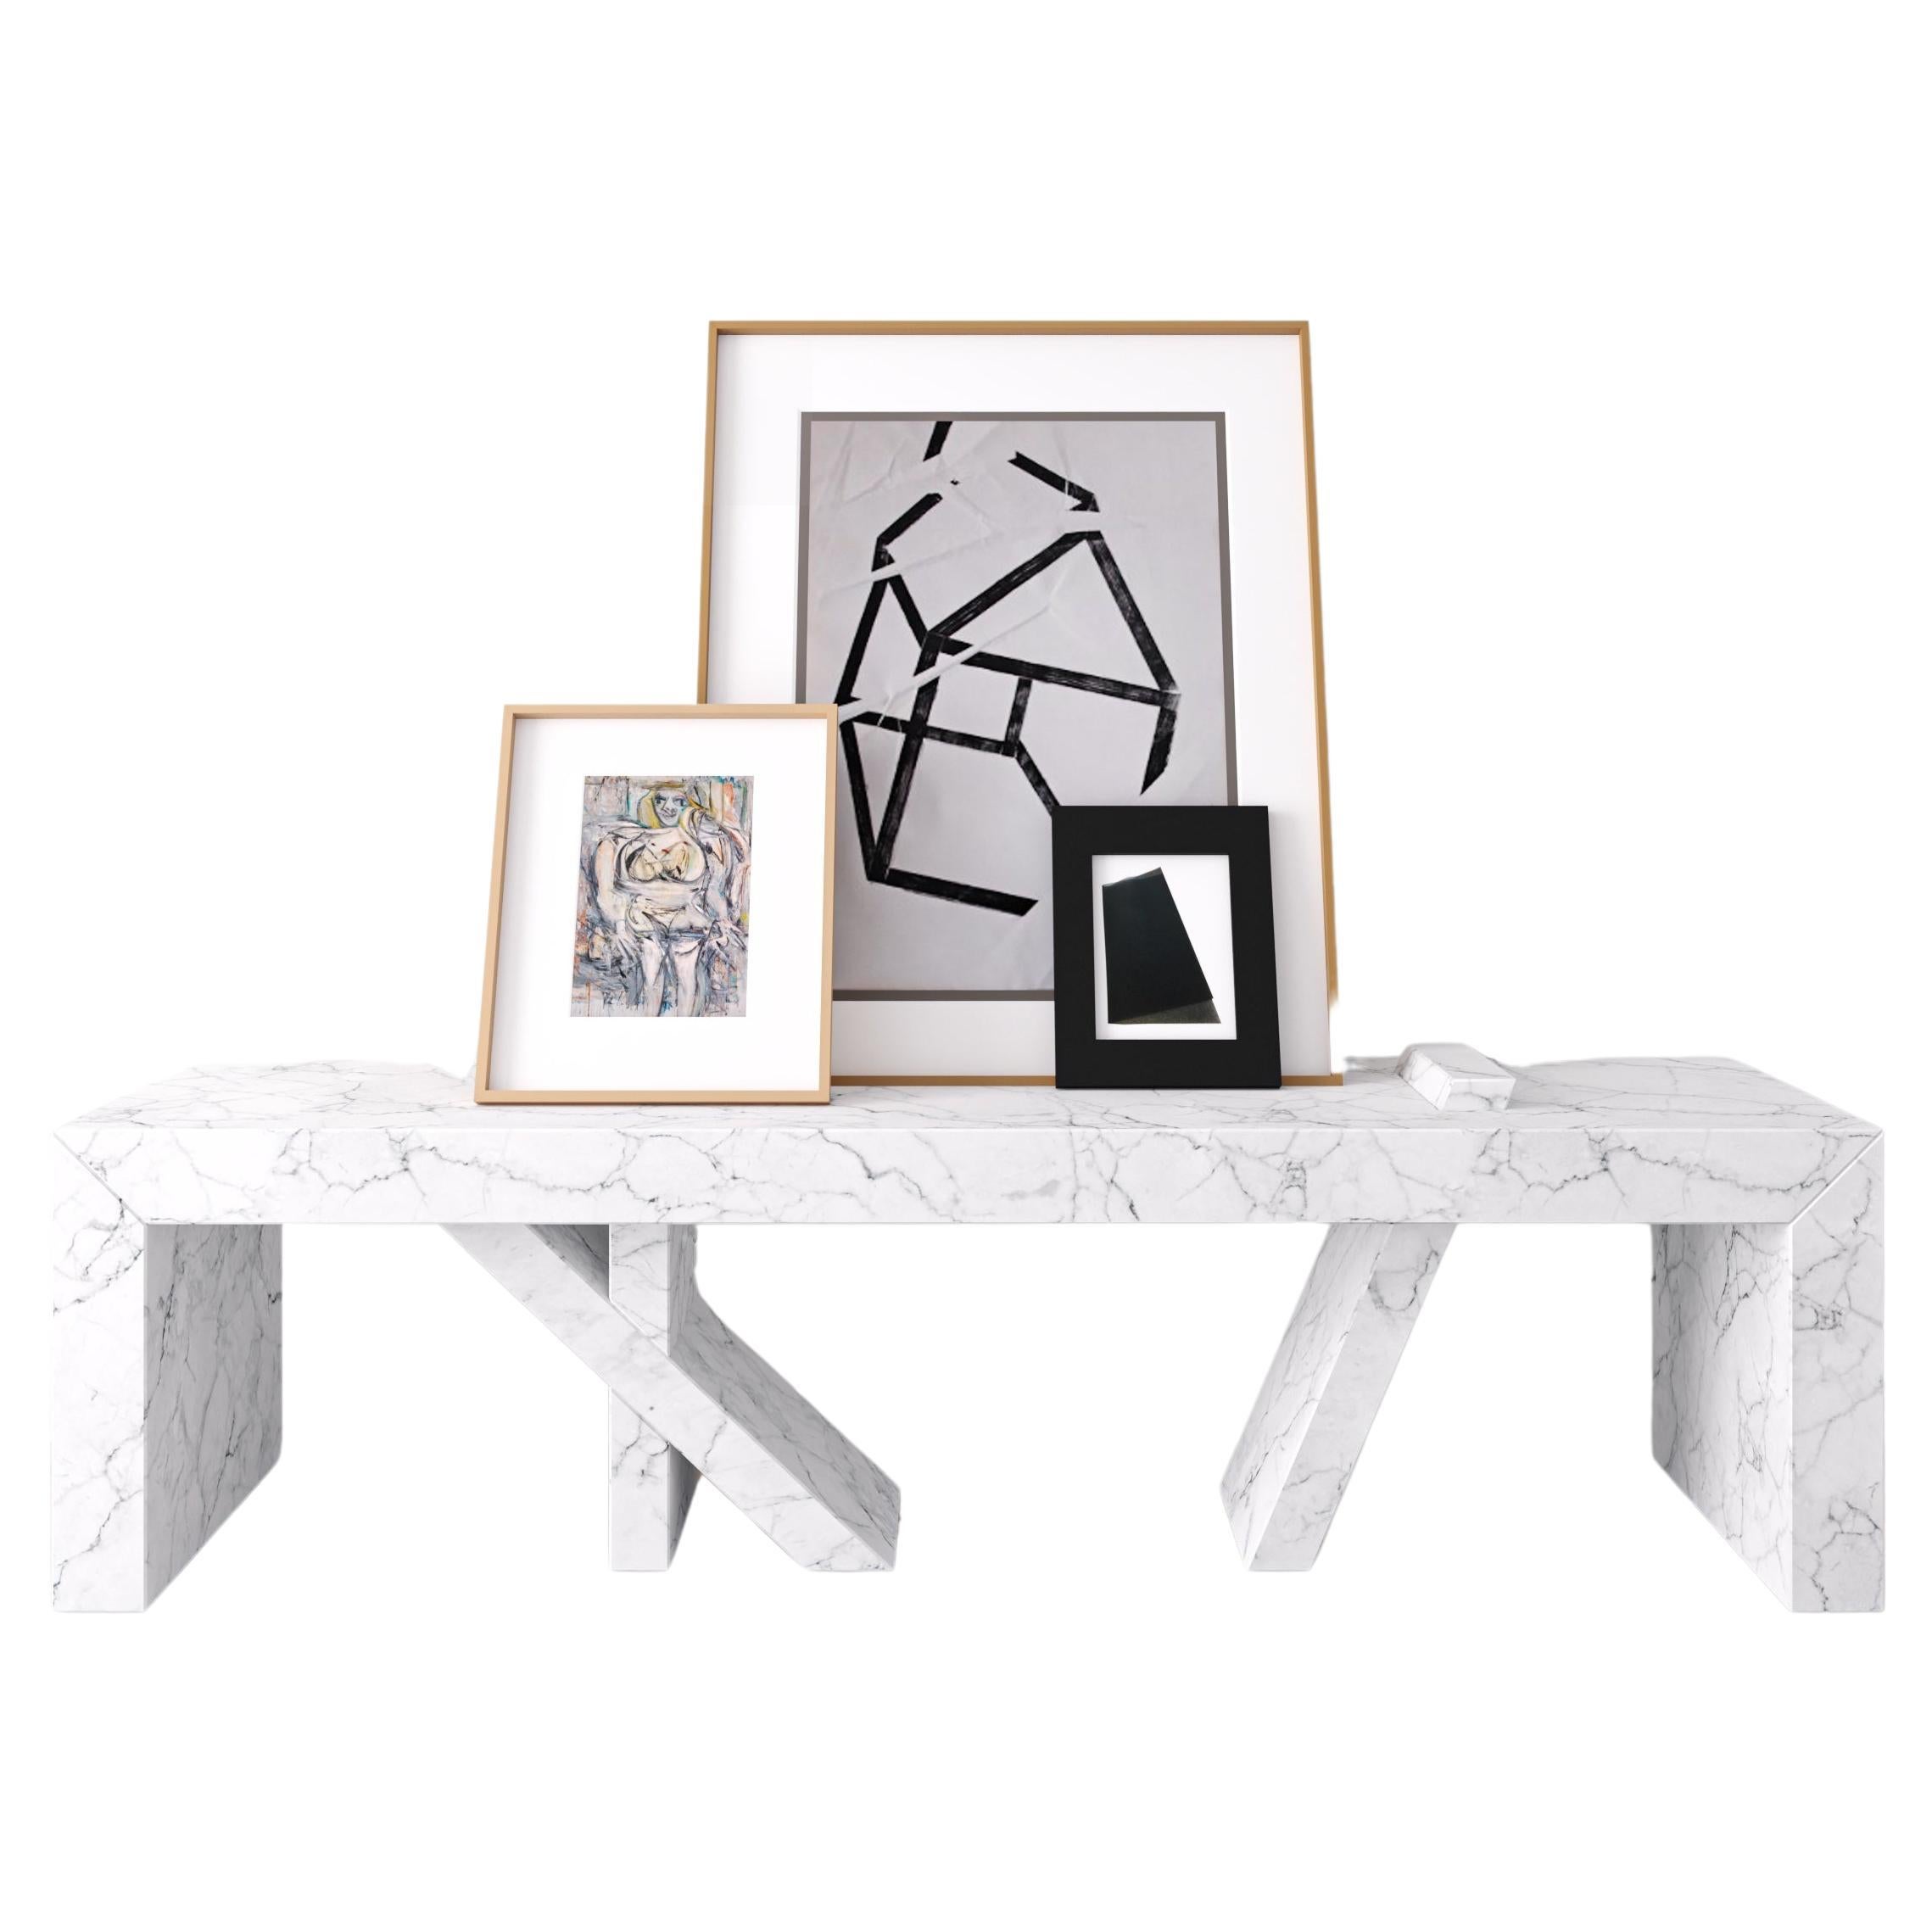 Walking Bench 6ft, solid white marble stone bench for indoor or outdoor use For Sale